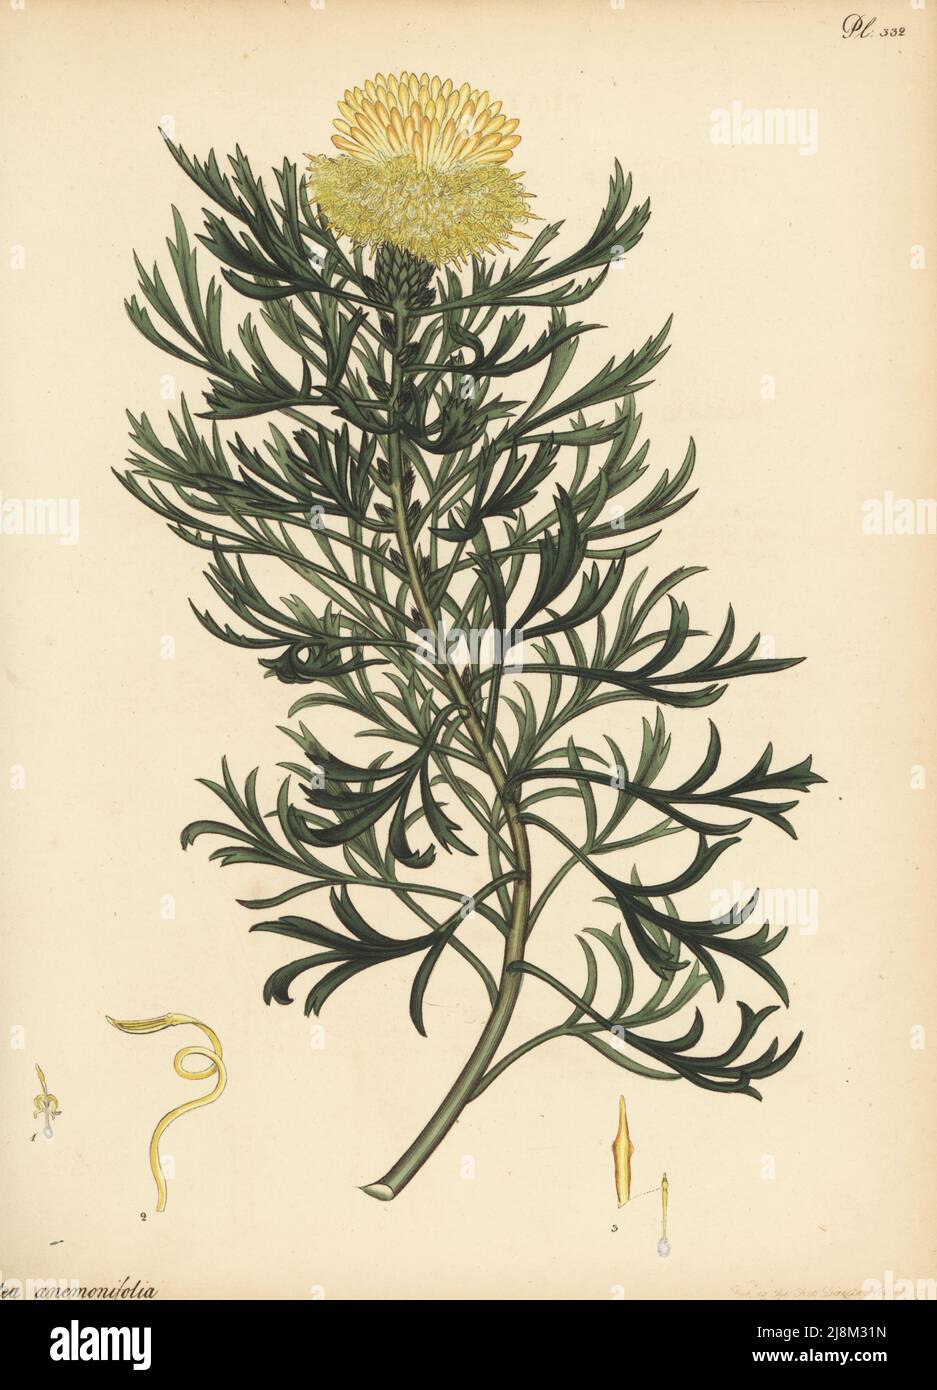 Broad-leaved drumsticks, Isopogon anemonifolius. Anemony-flowered protea, Protea anemonifolia. From New Holland, Australia, in Lee and Kennedy's Hammersmith Nursery. Copperplate engraving drawn, engraved and hand-coloured by Henry Andrews from his Botanical Register, Volume 5, self-published in Knightsbridge, London, 1803. Stock Photo